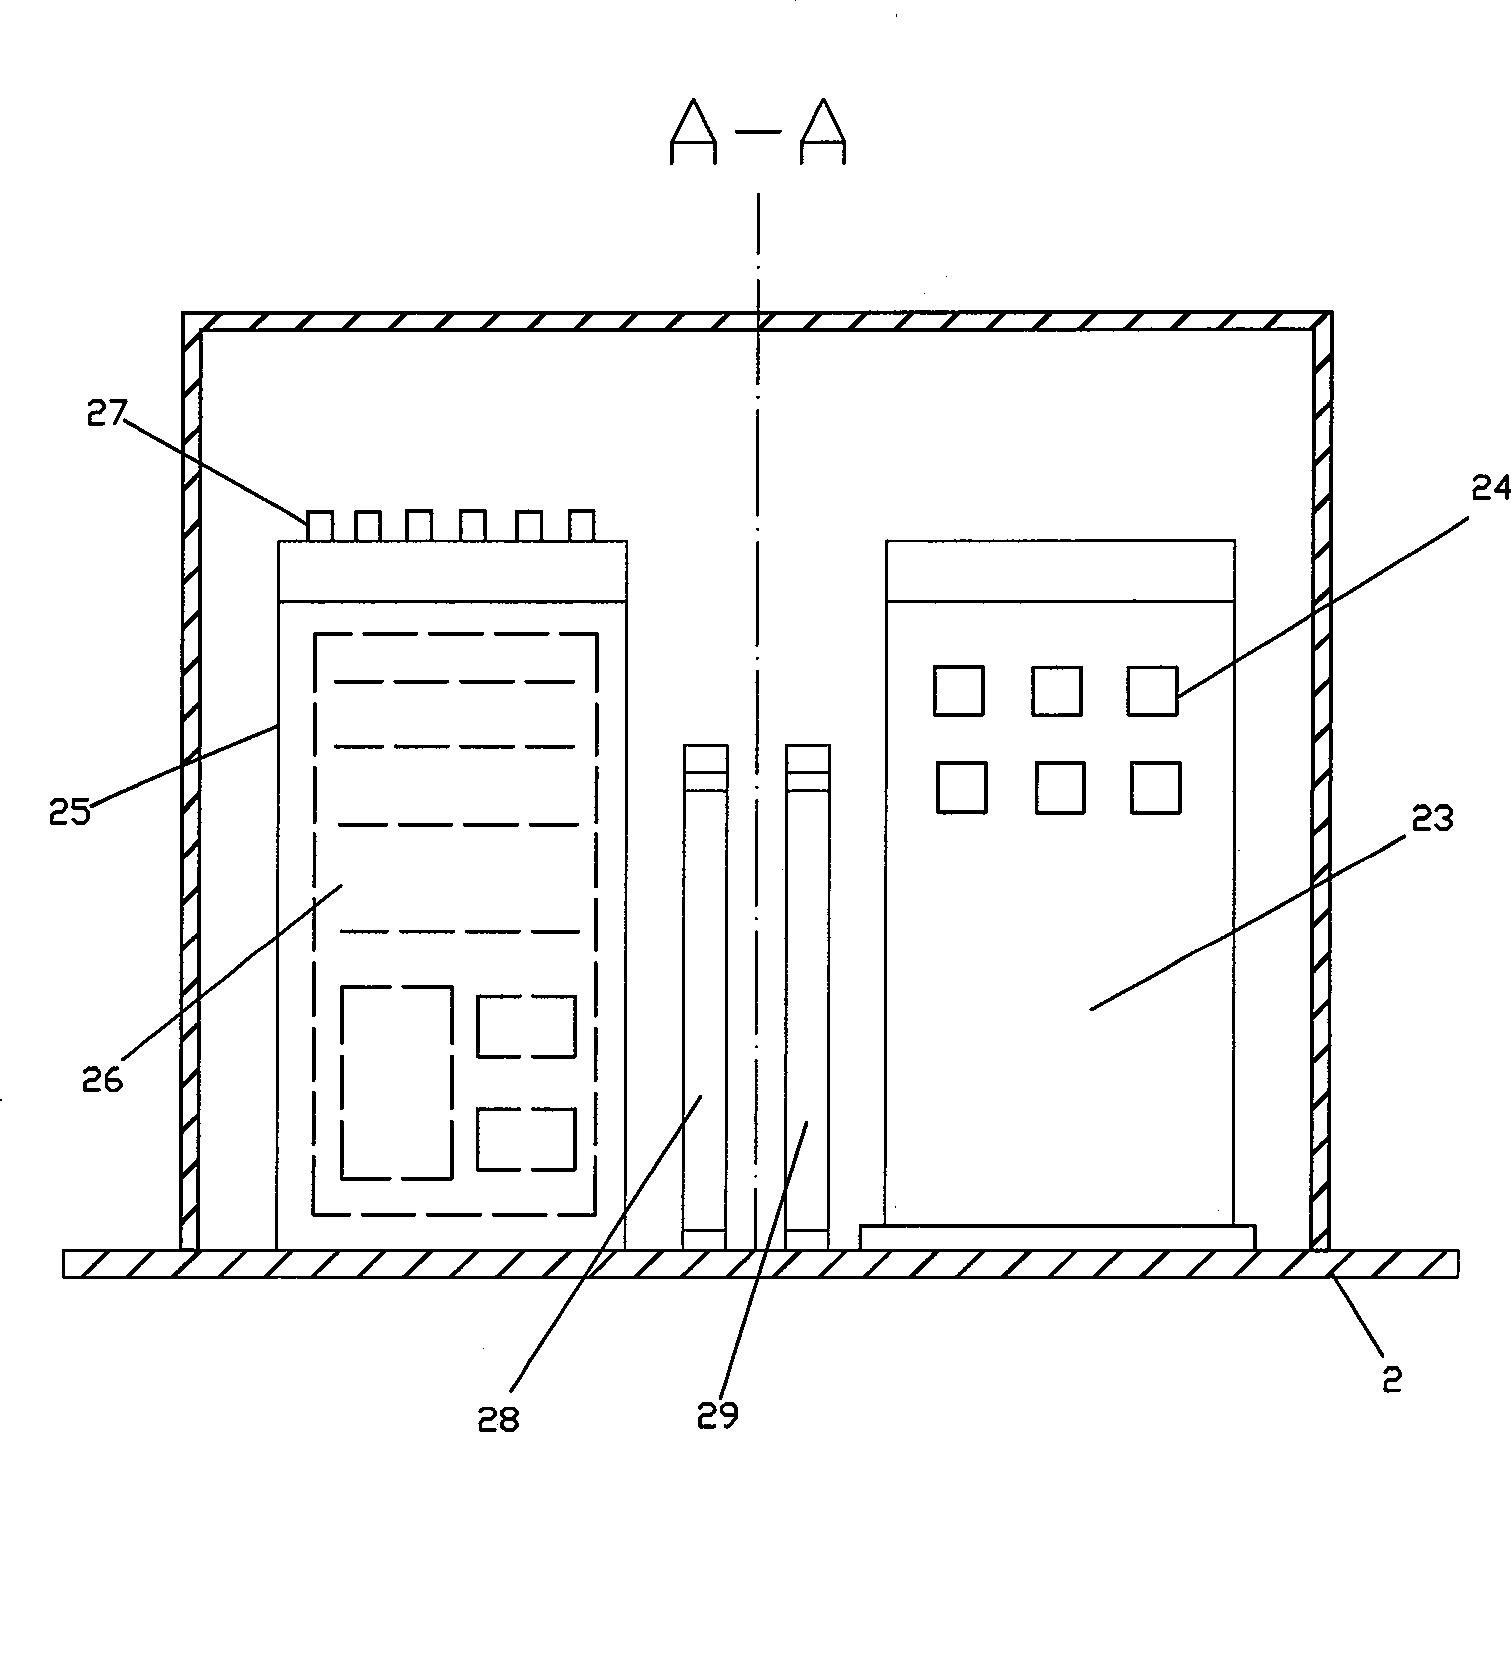 Digital monitoring apparatus for electricity transmission line